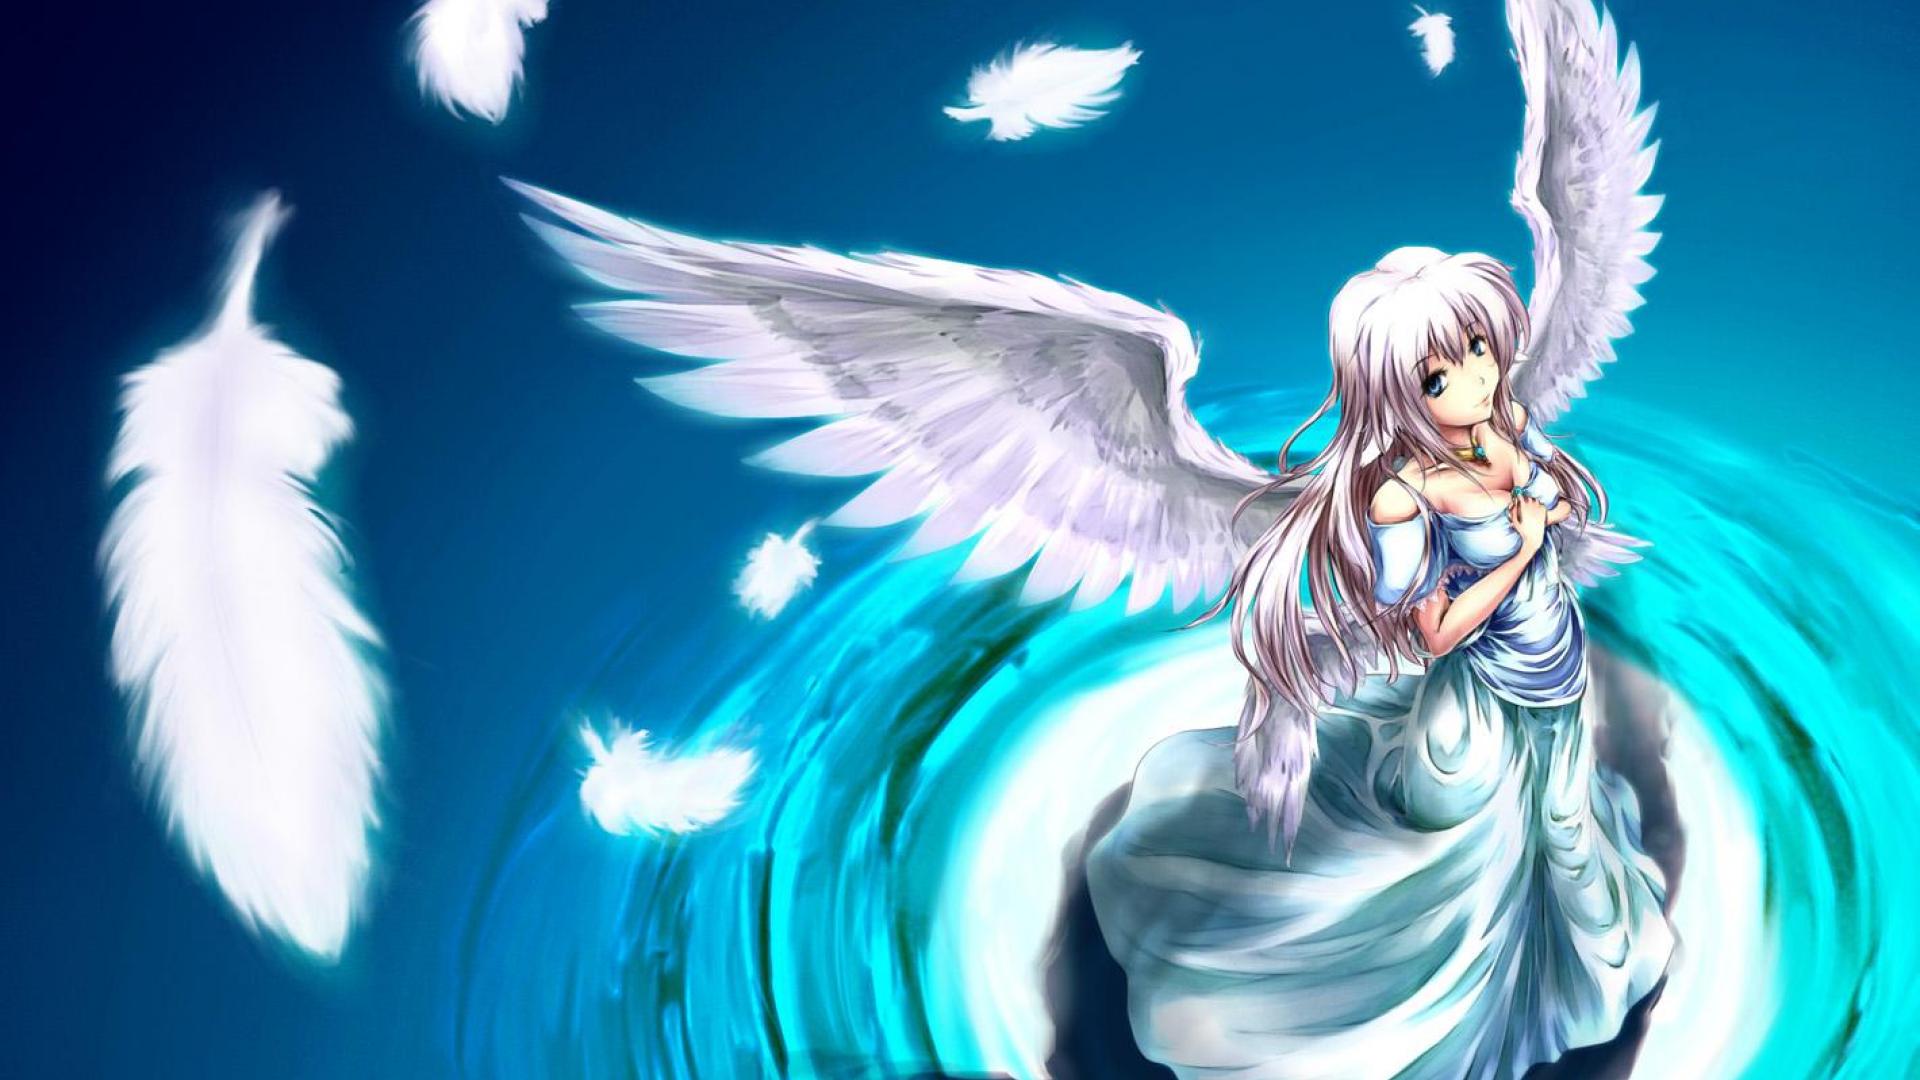 Anime Angels Wallpapers on WallpaperDog